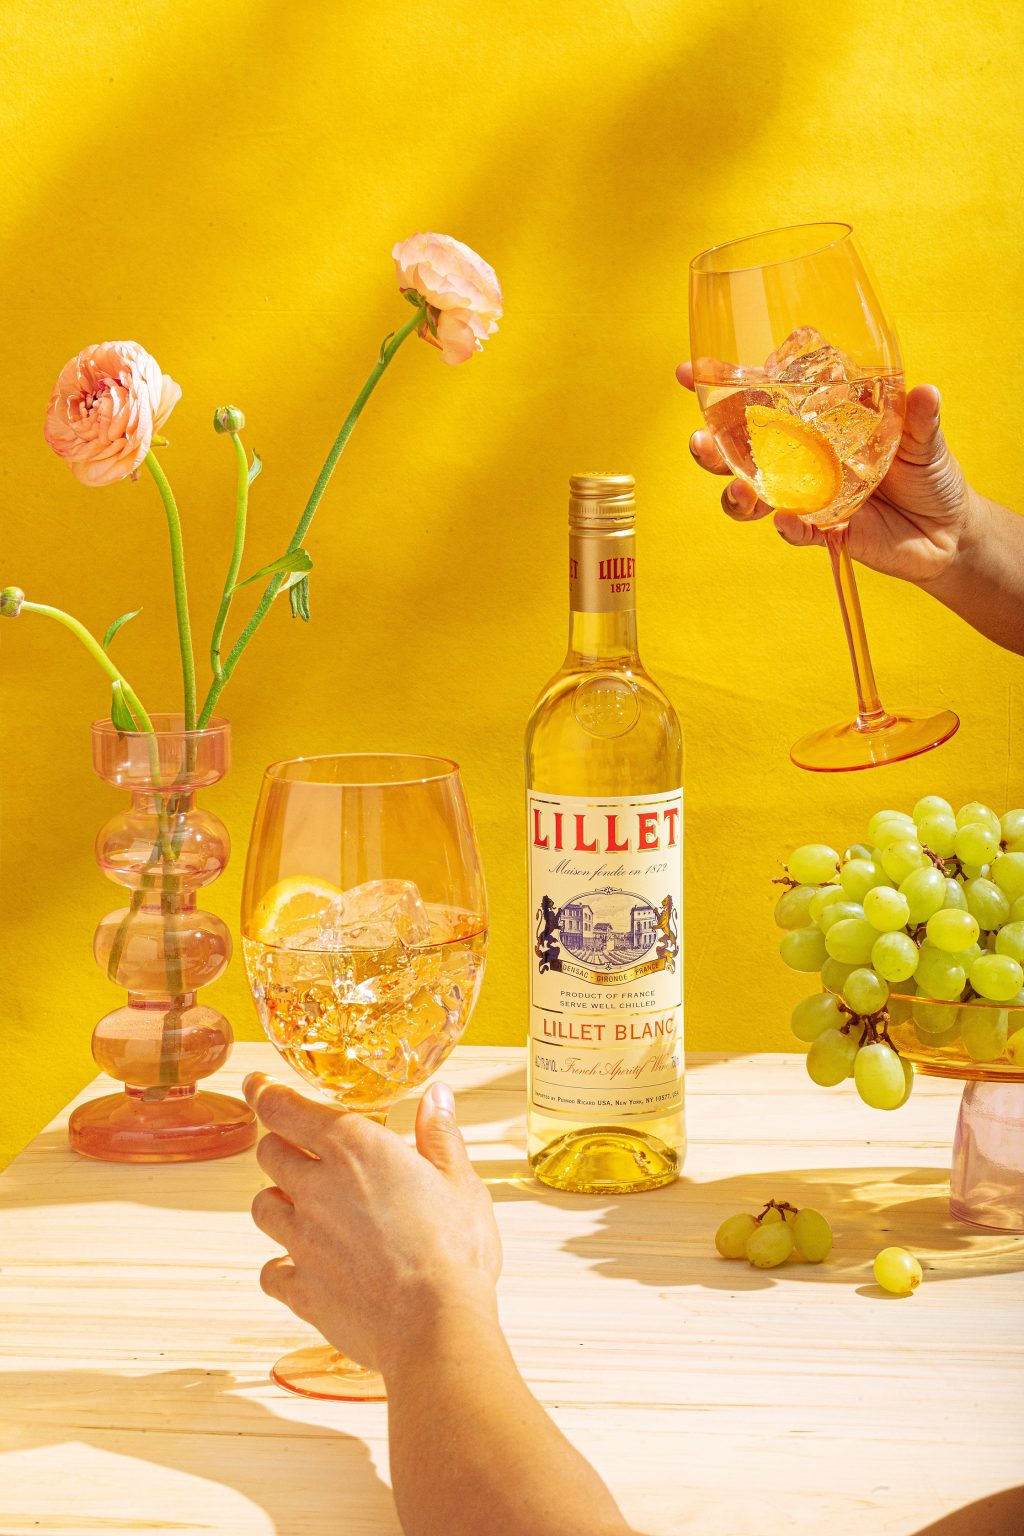 Suze Original: Our Classic and Iconic French Aperitif